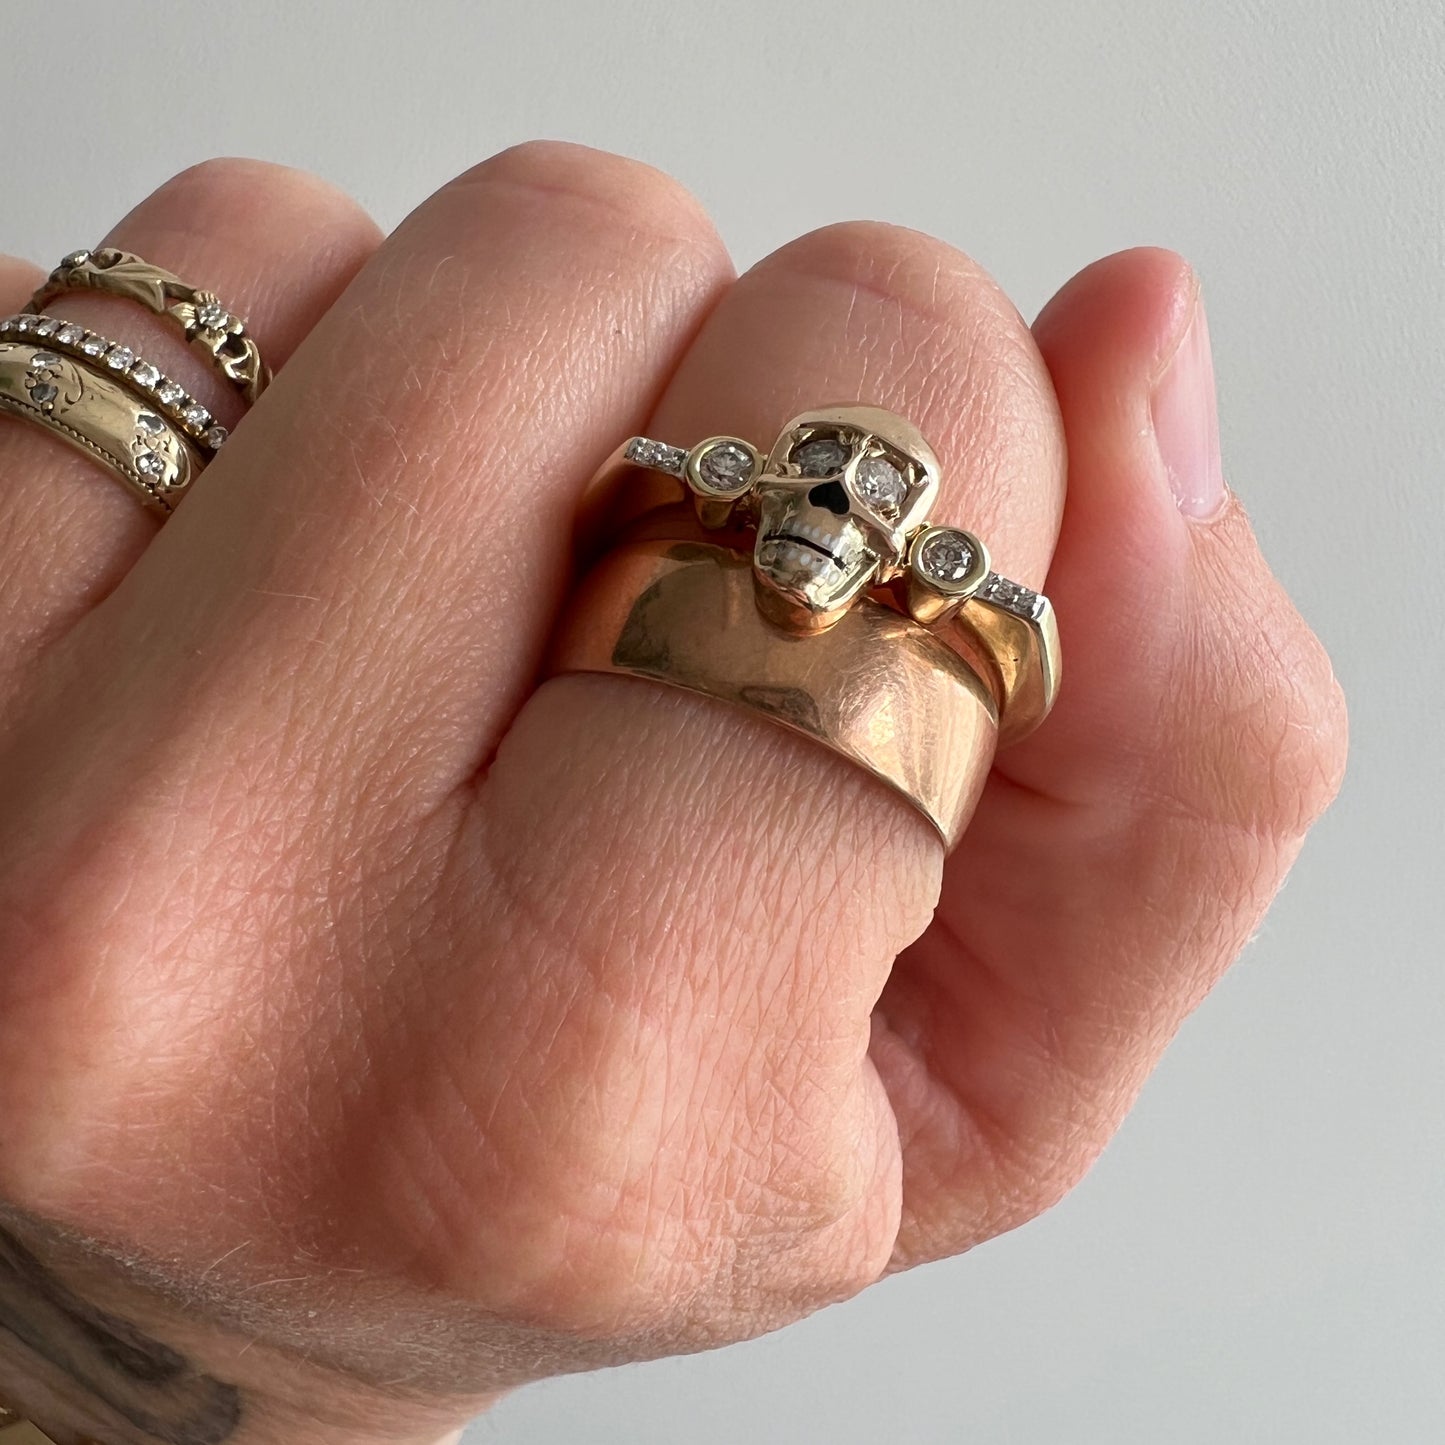 reimagined V I N T A G E // memento mori grin / solid 10k and diamond fraternal skull pin conversion ring / size 7.75